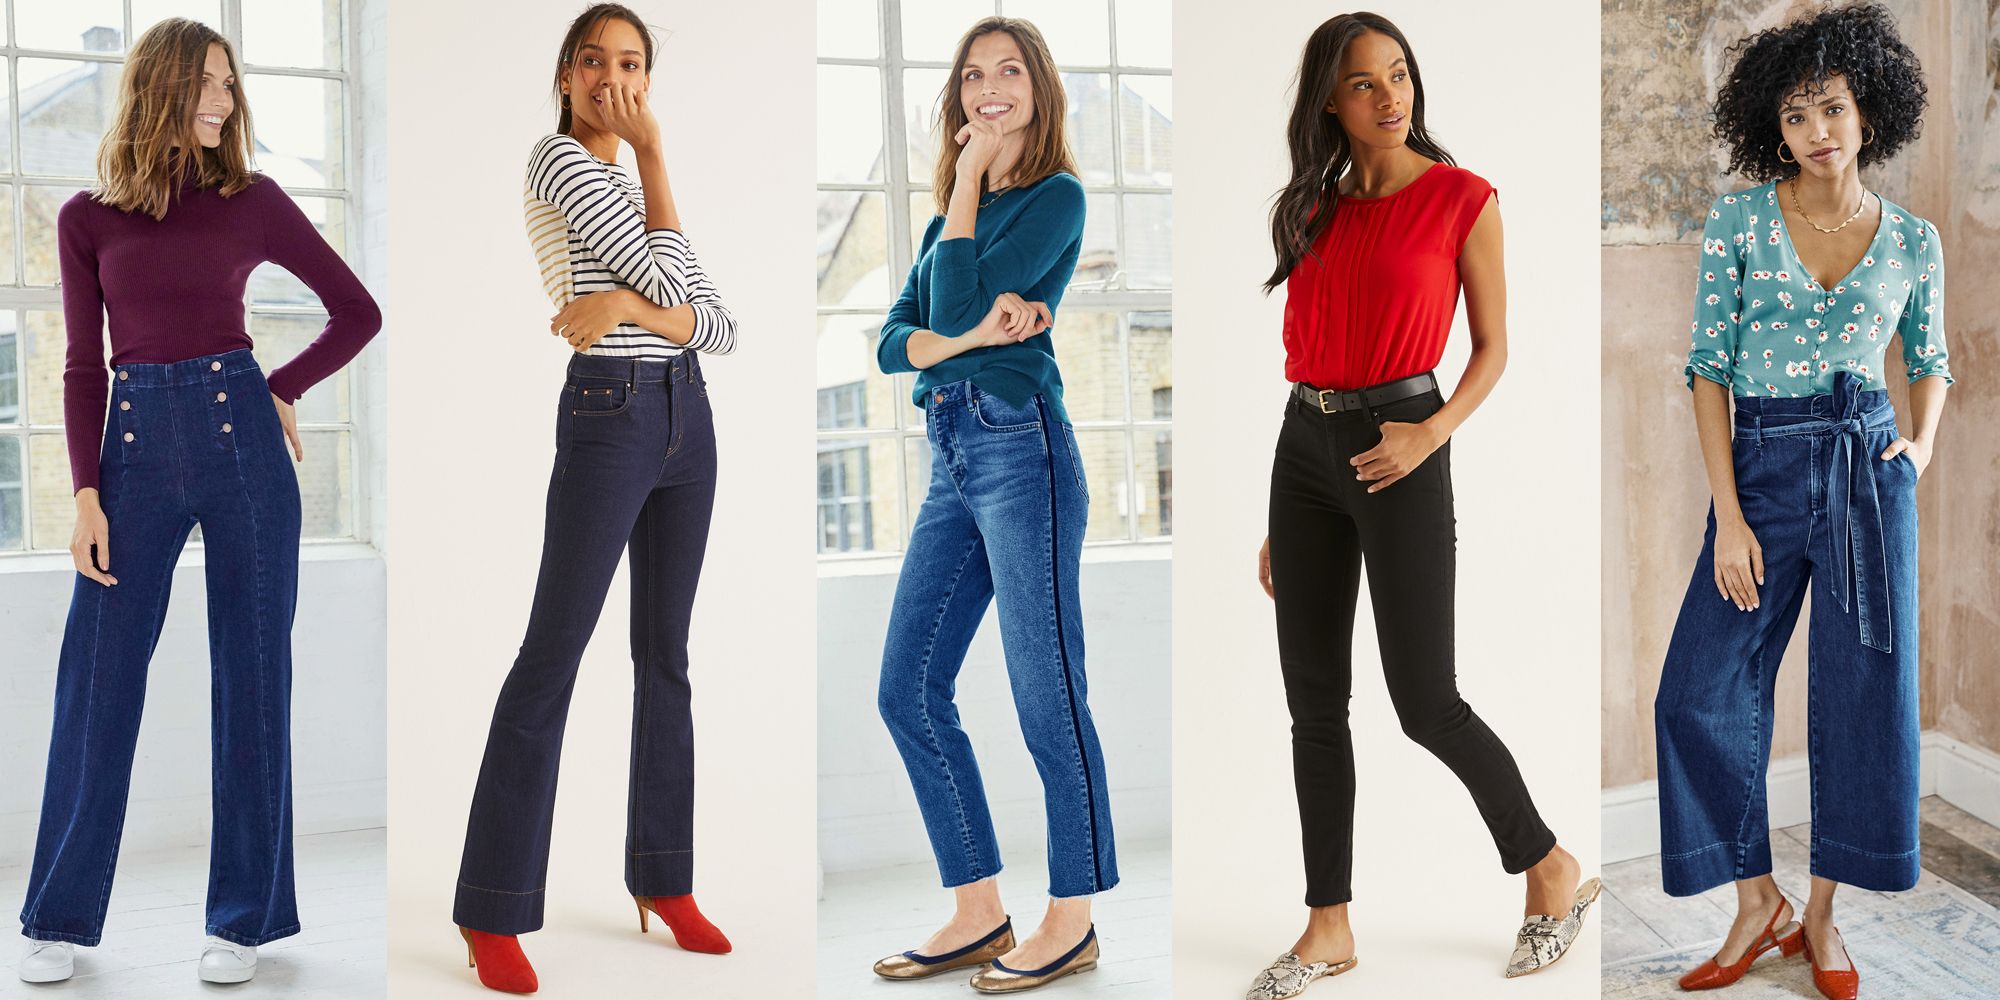 appel Integral fritid Boden jeans - Boden launches new "jeans for every body" denim collection